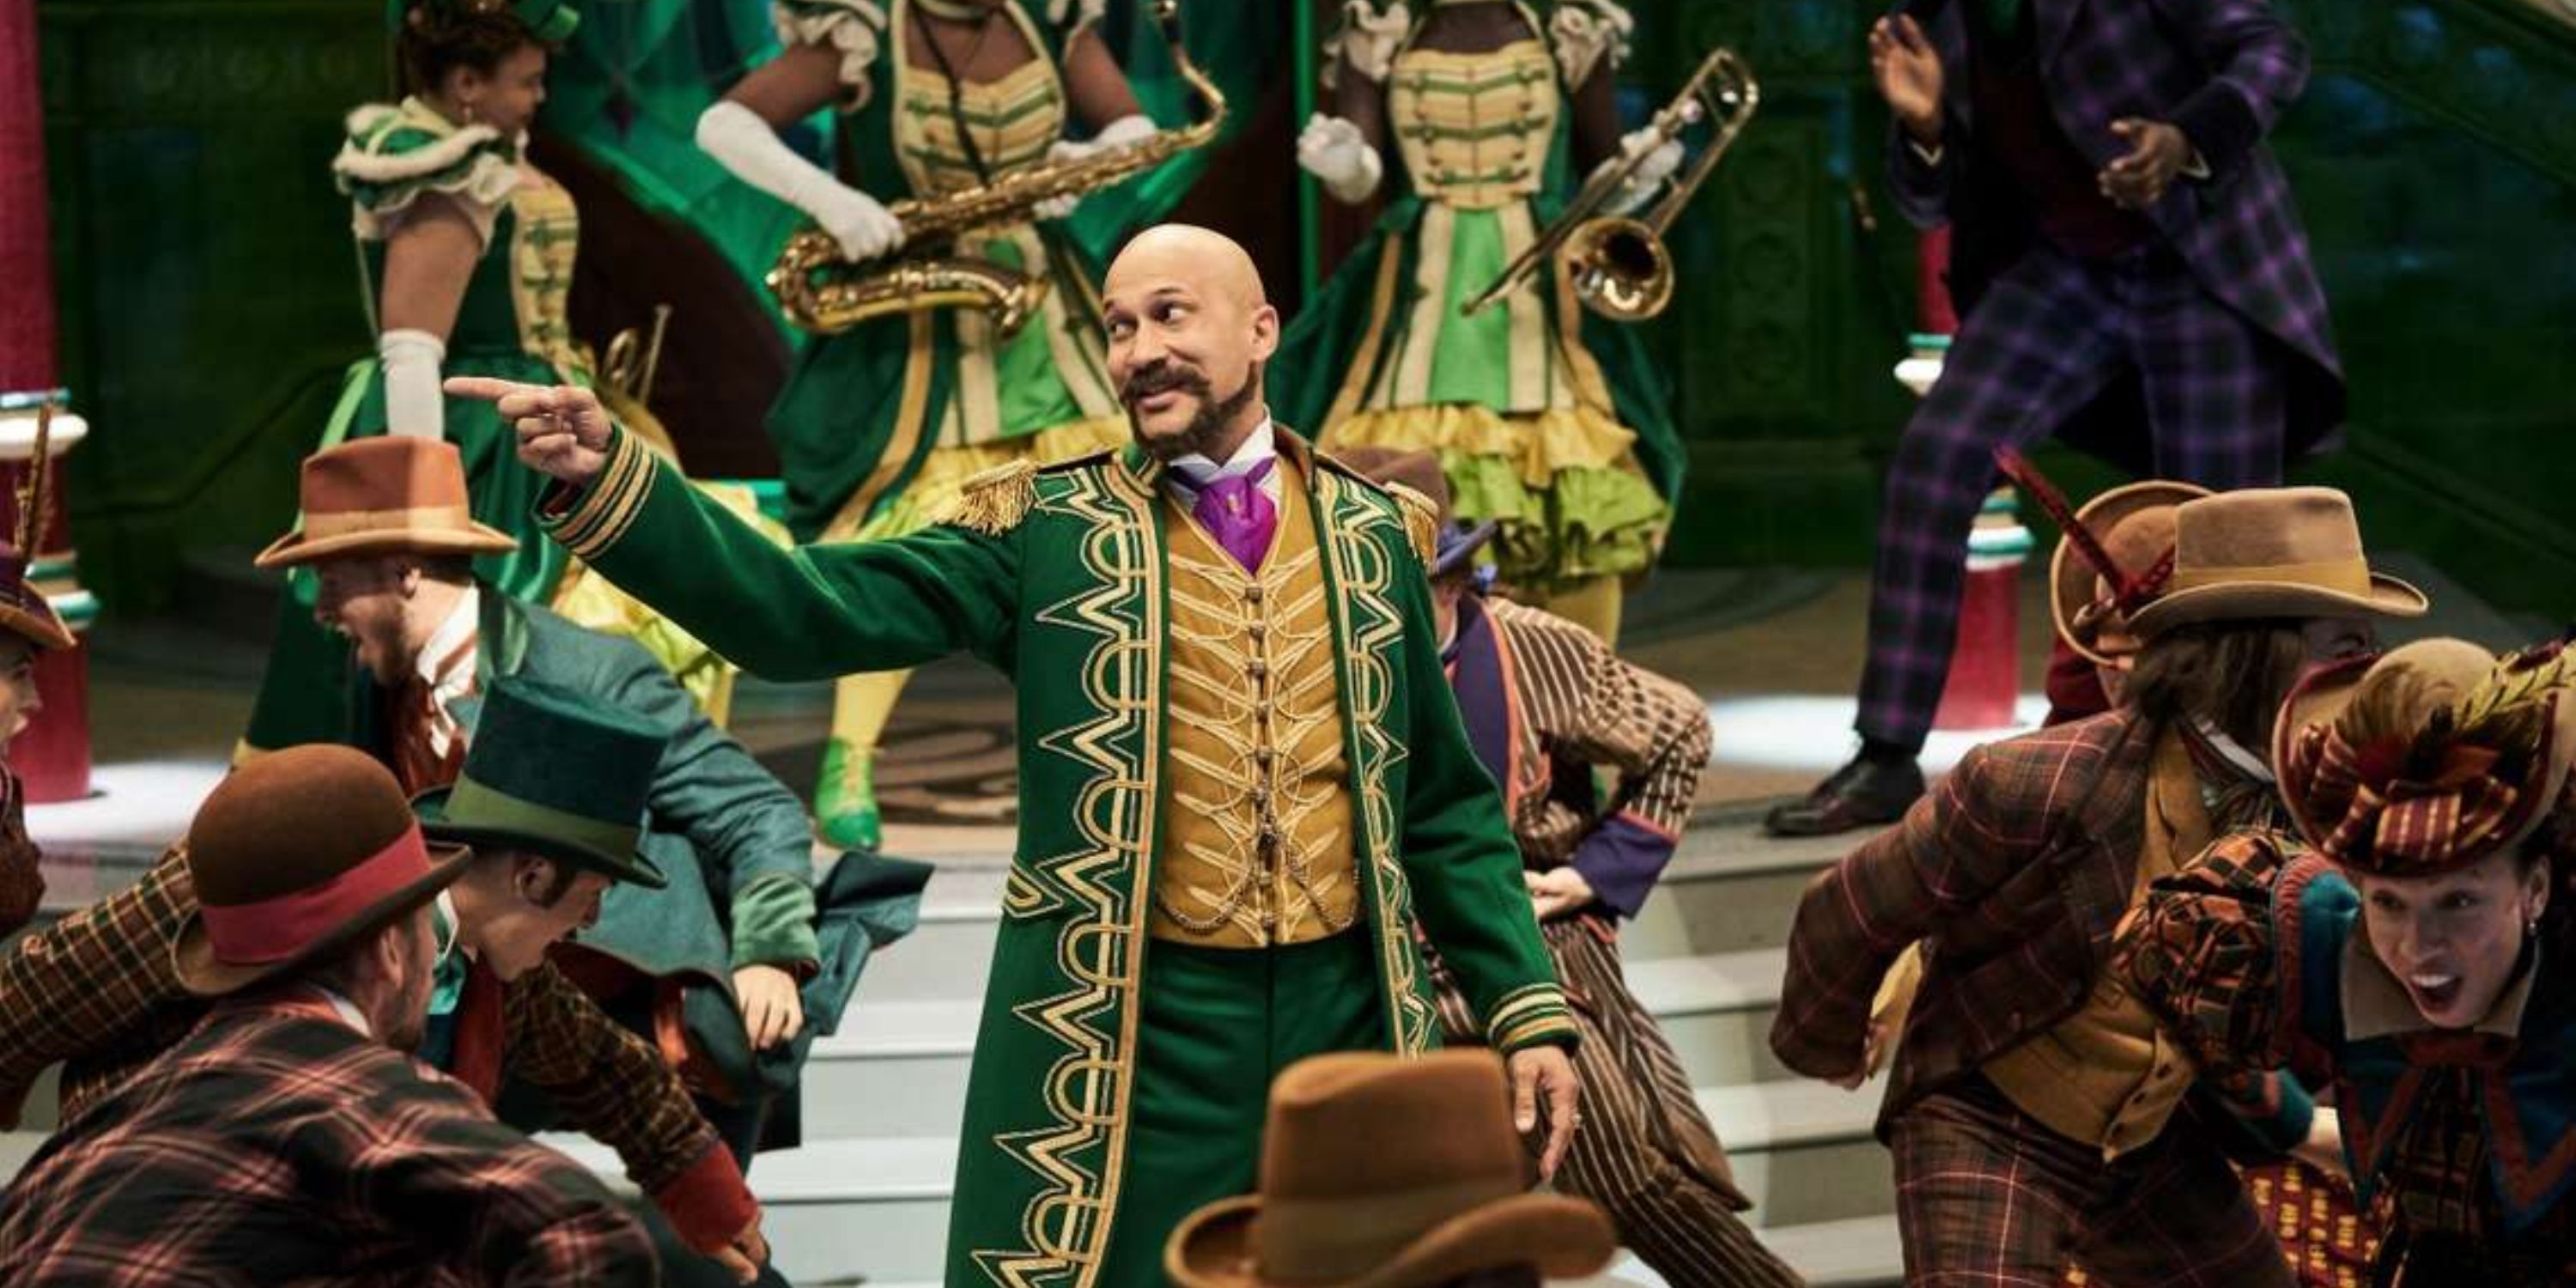 Keegan-Michael Key as Gustafson singing and pointing to his right while surrounded by dancers in Jingle Jangle: A Christmas Journey